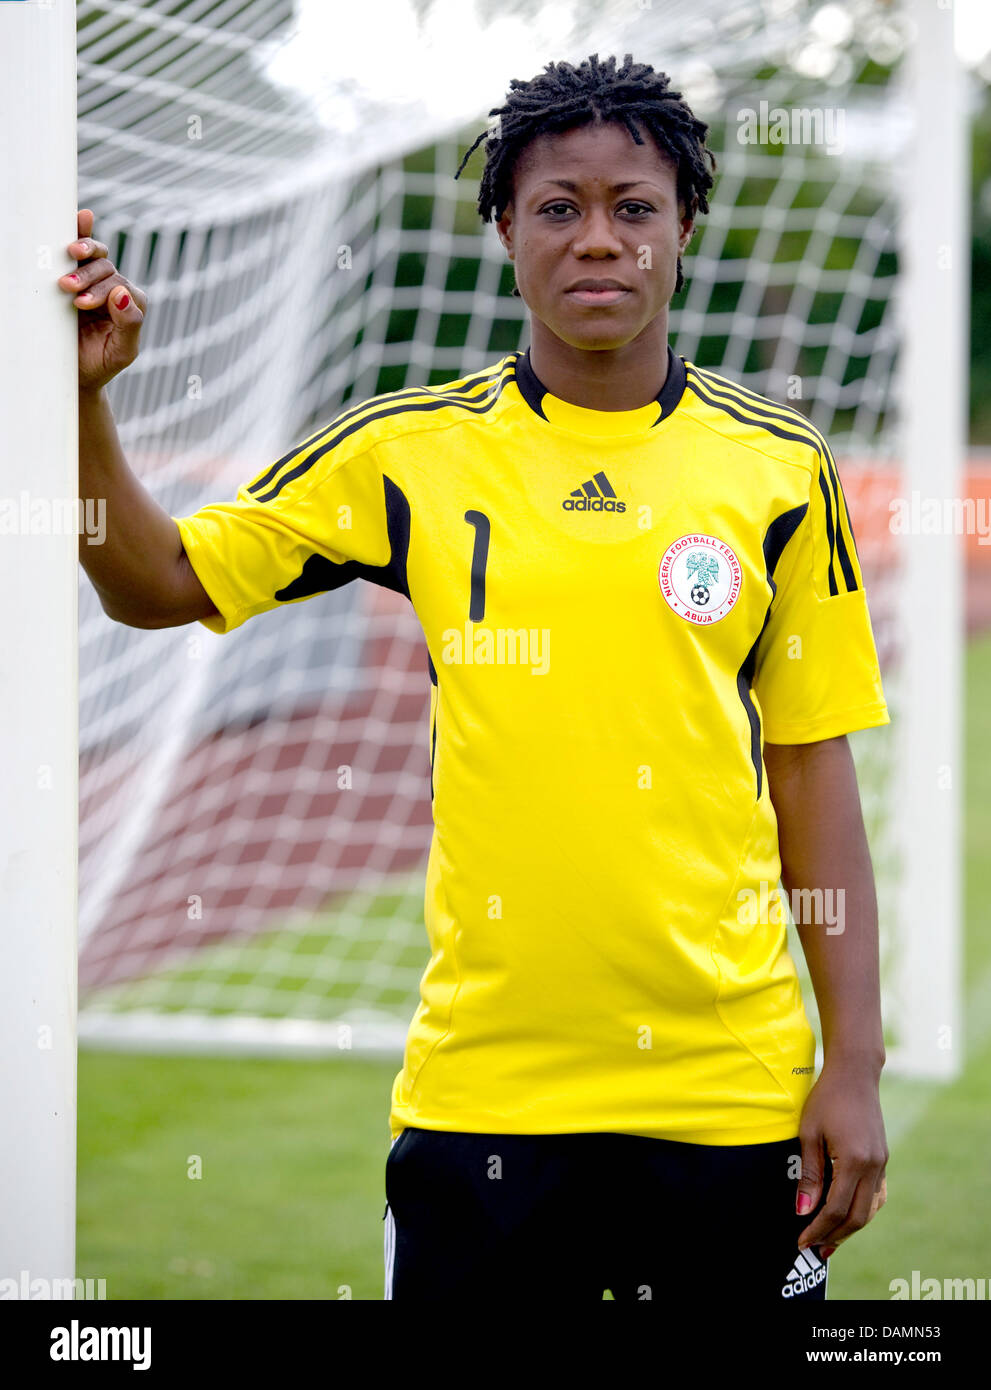 The goalkeeper of the Nigerian national women's soccer team, Precious Dede, stands at a goalpost during practice in Heidelberg, Germany, 23 June 2011. The Nigerian team plays its first match against France on 26 June 2011. Photo: Uwe Anspach Stock Photo